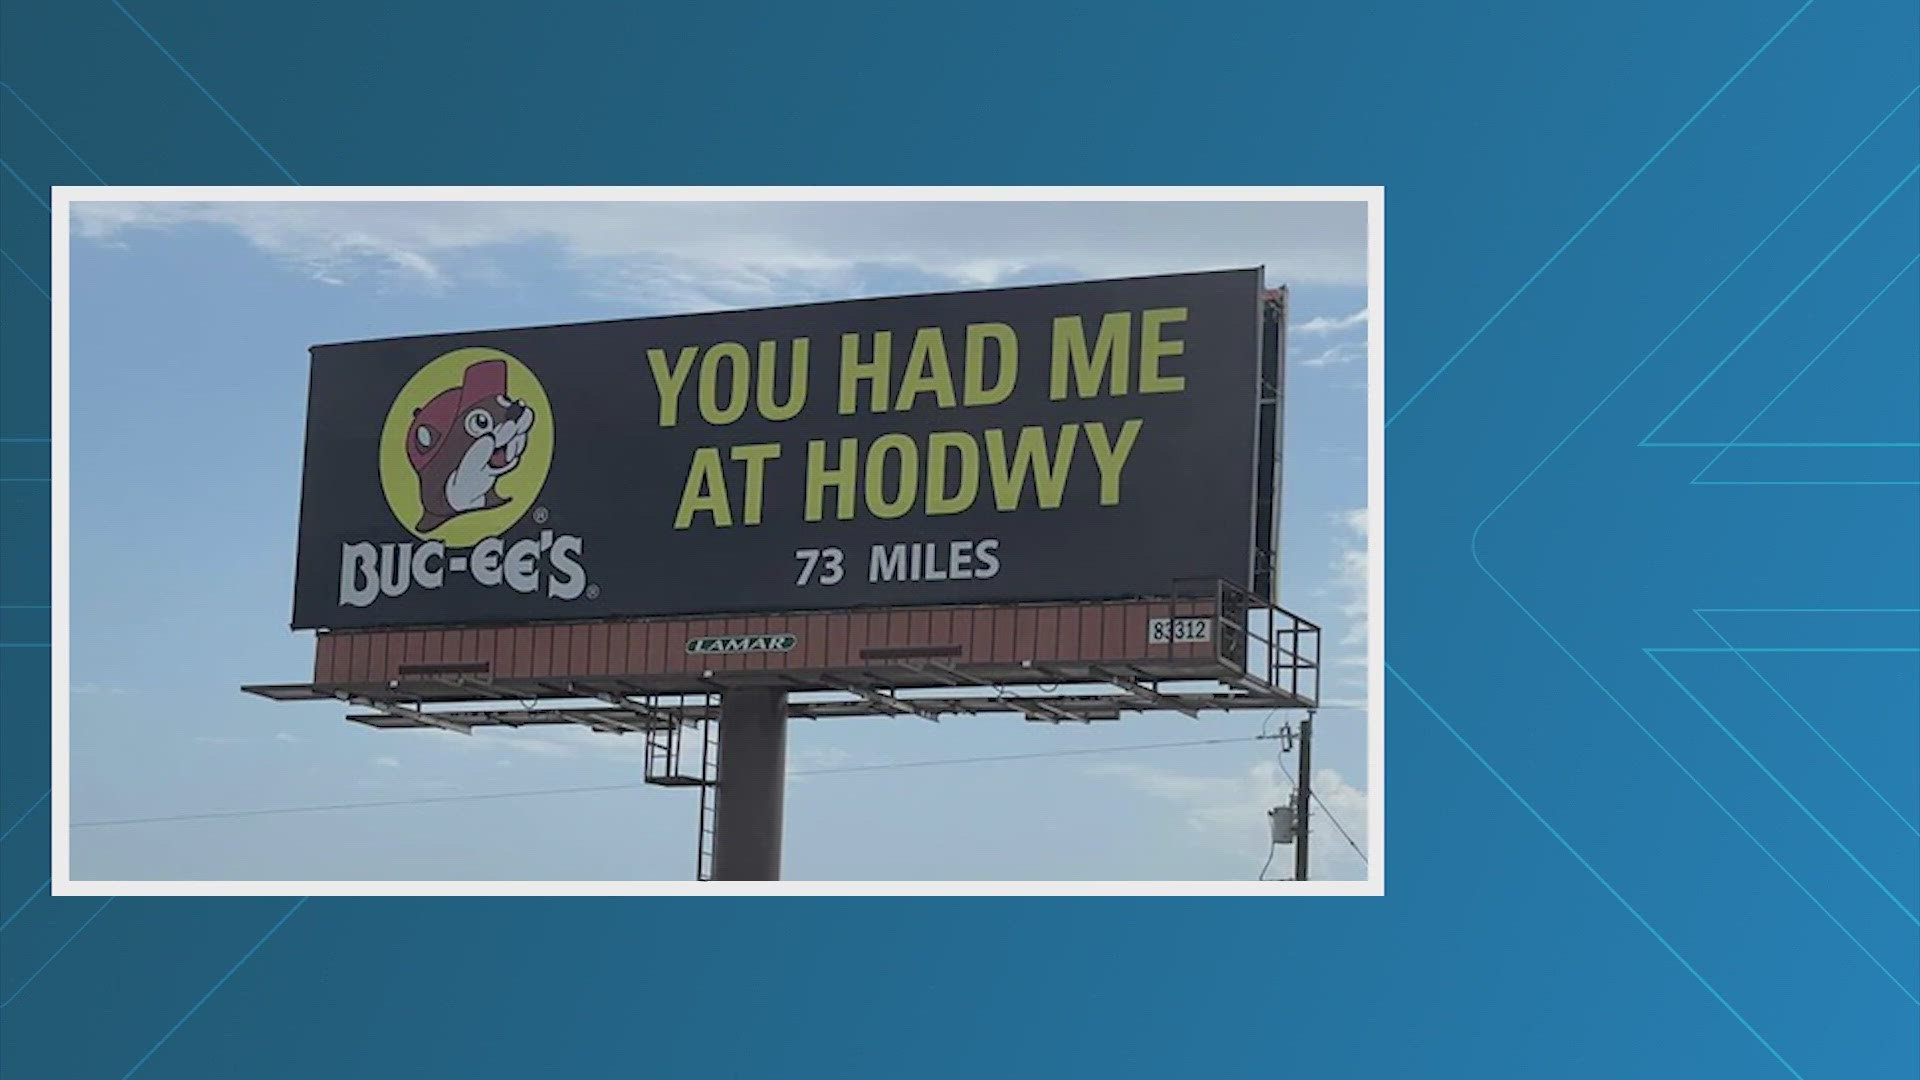 Eagle-eyed motorists noticed something a little off in one of Buc-ee's many roadside billboards on Texas highways.